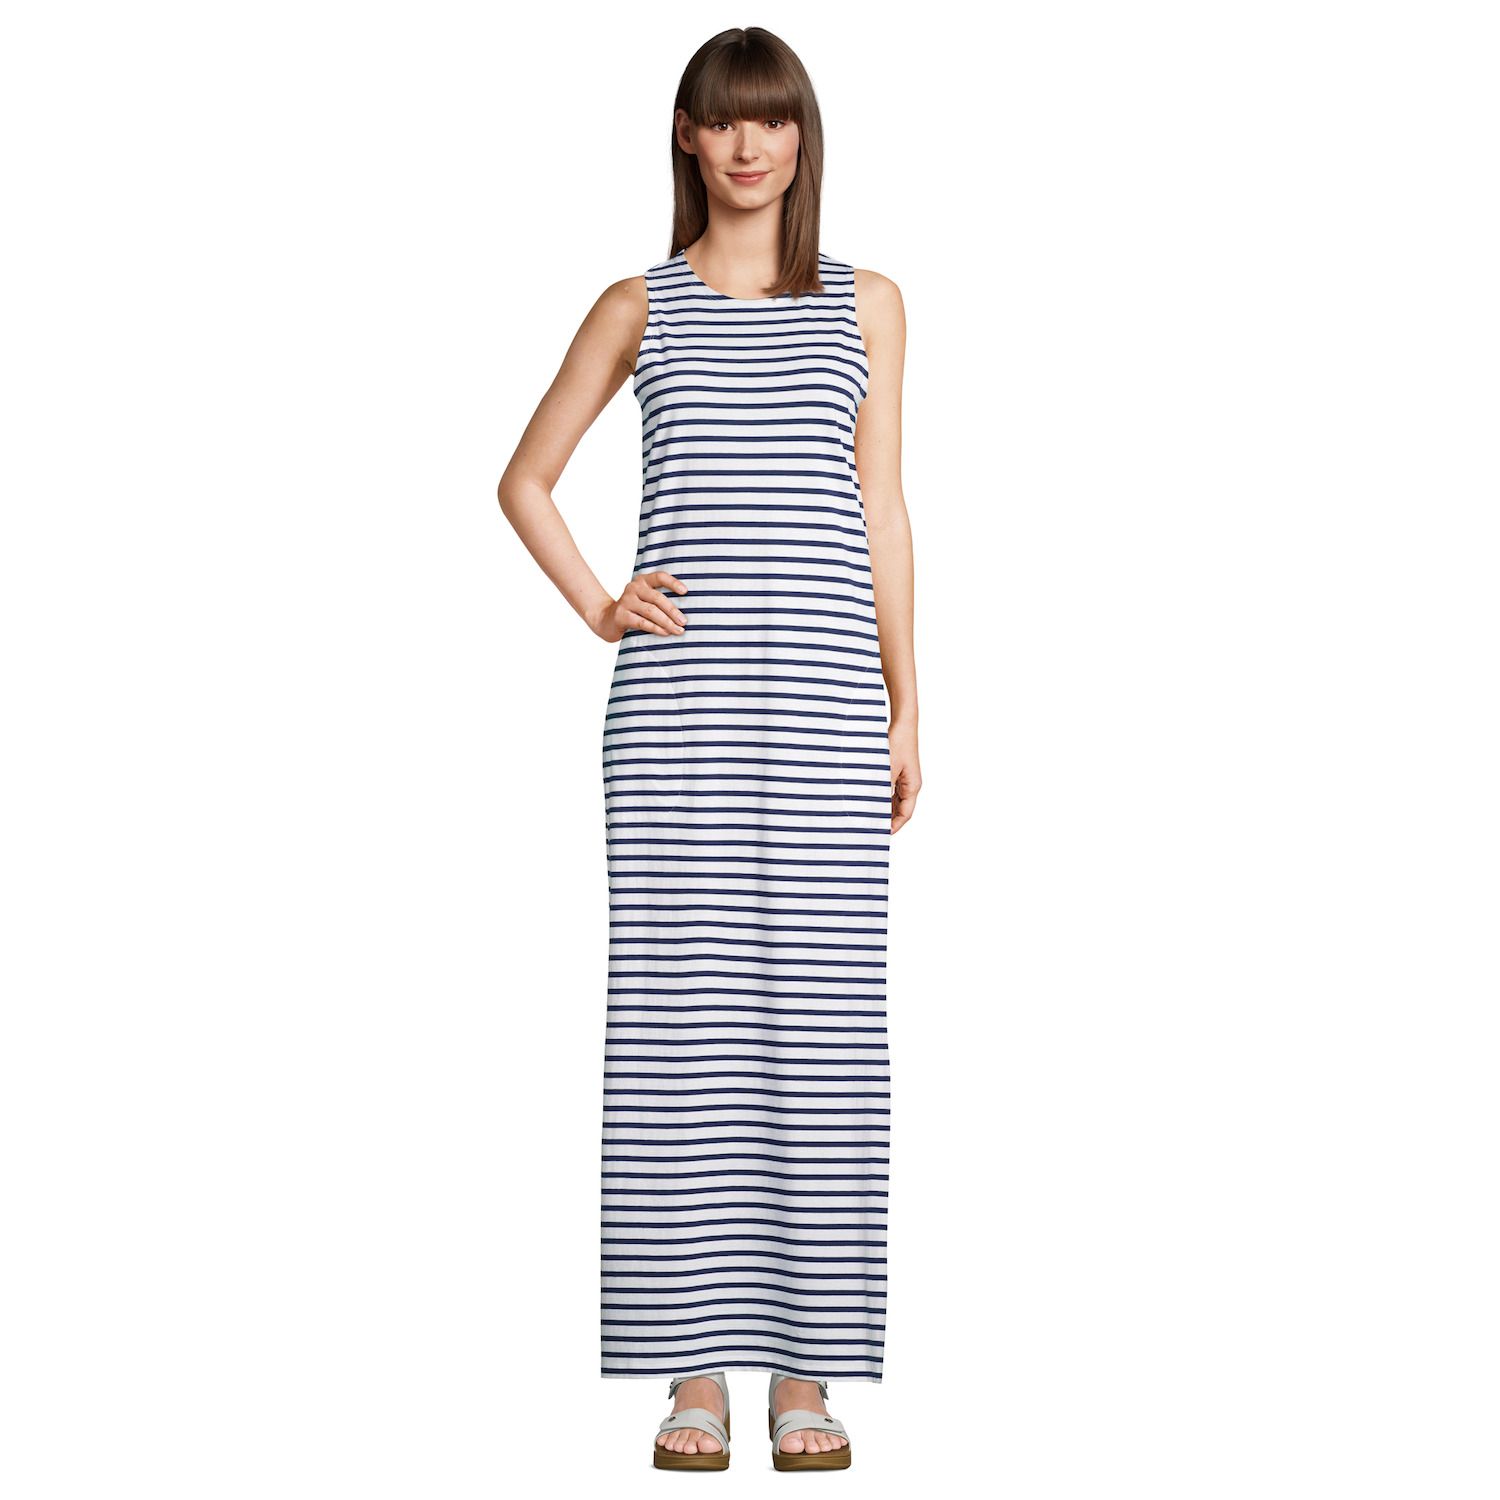 Image for Lands' End Women's High Neck Print Cover-Up Maxi Dress at Kohl's.